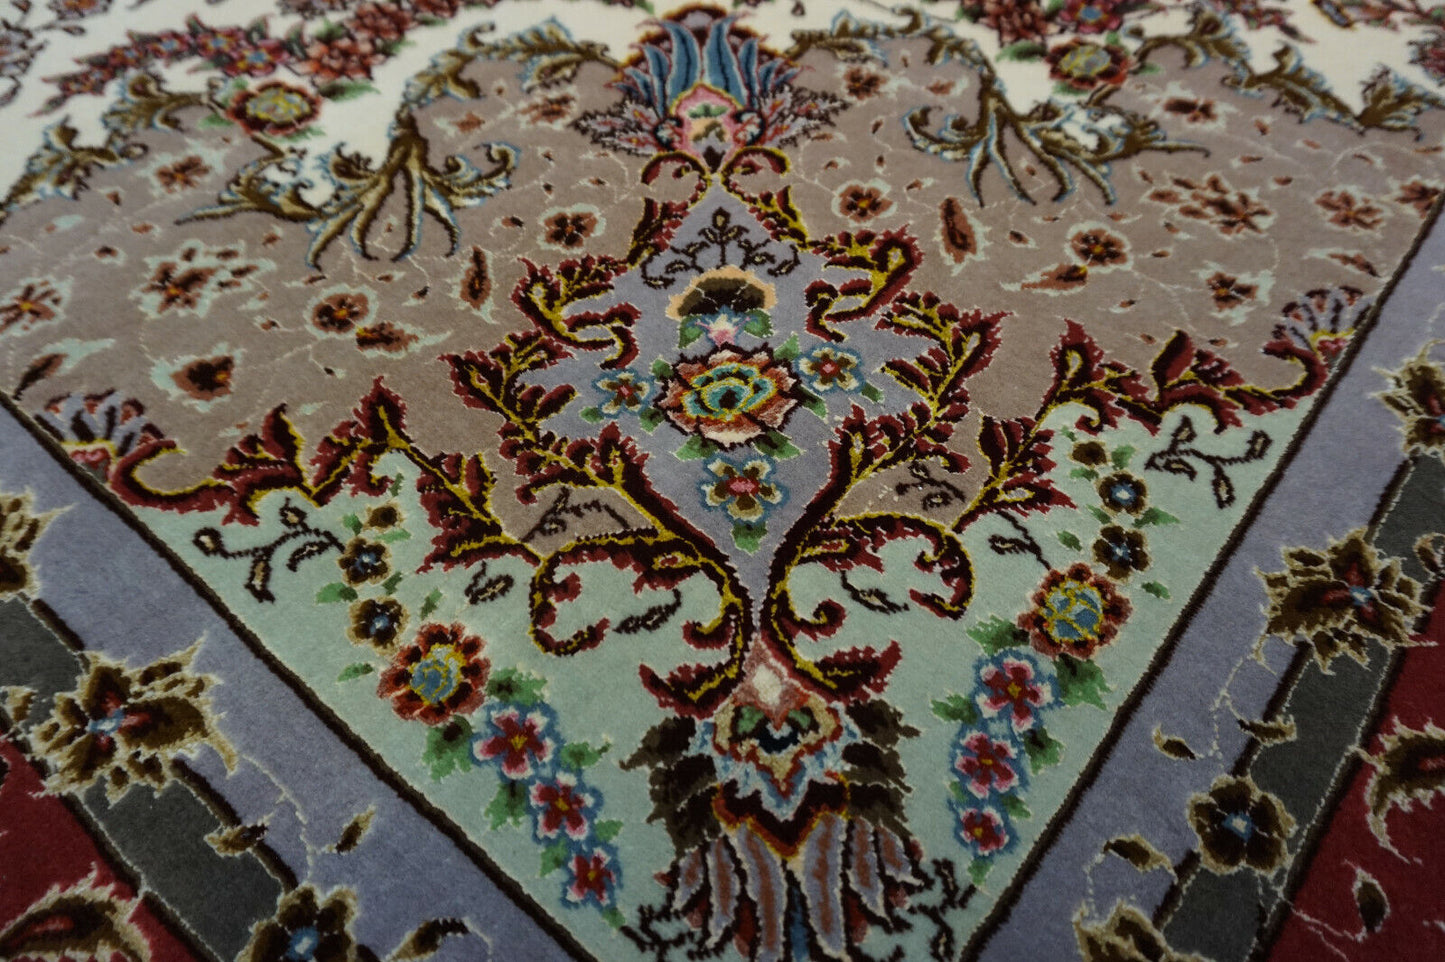 Side view of the Persian Tabriz rug highlighting its rectangular shape and size